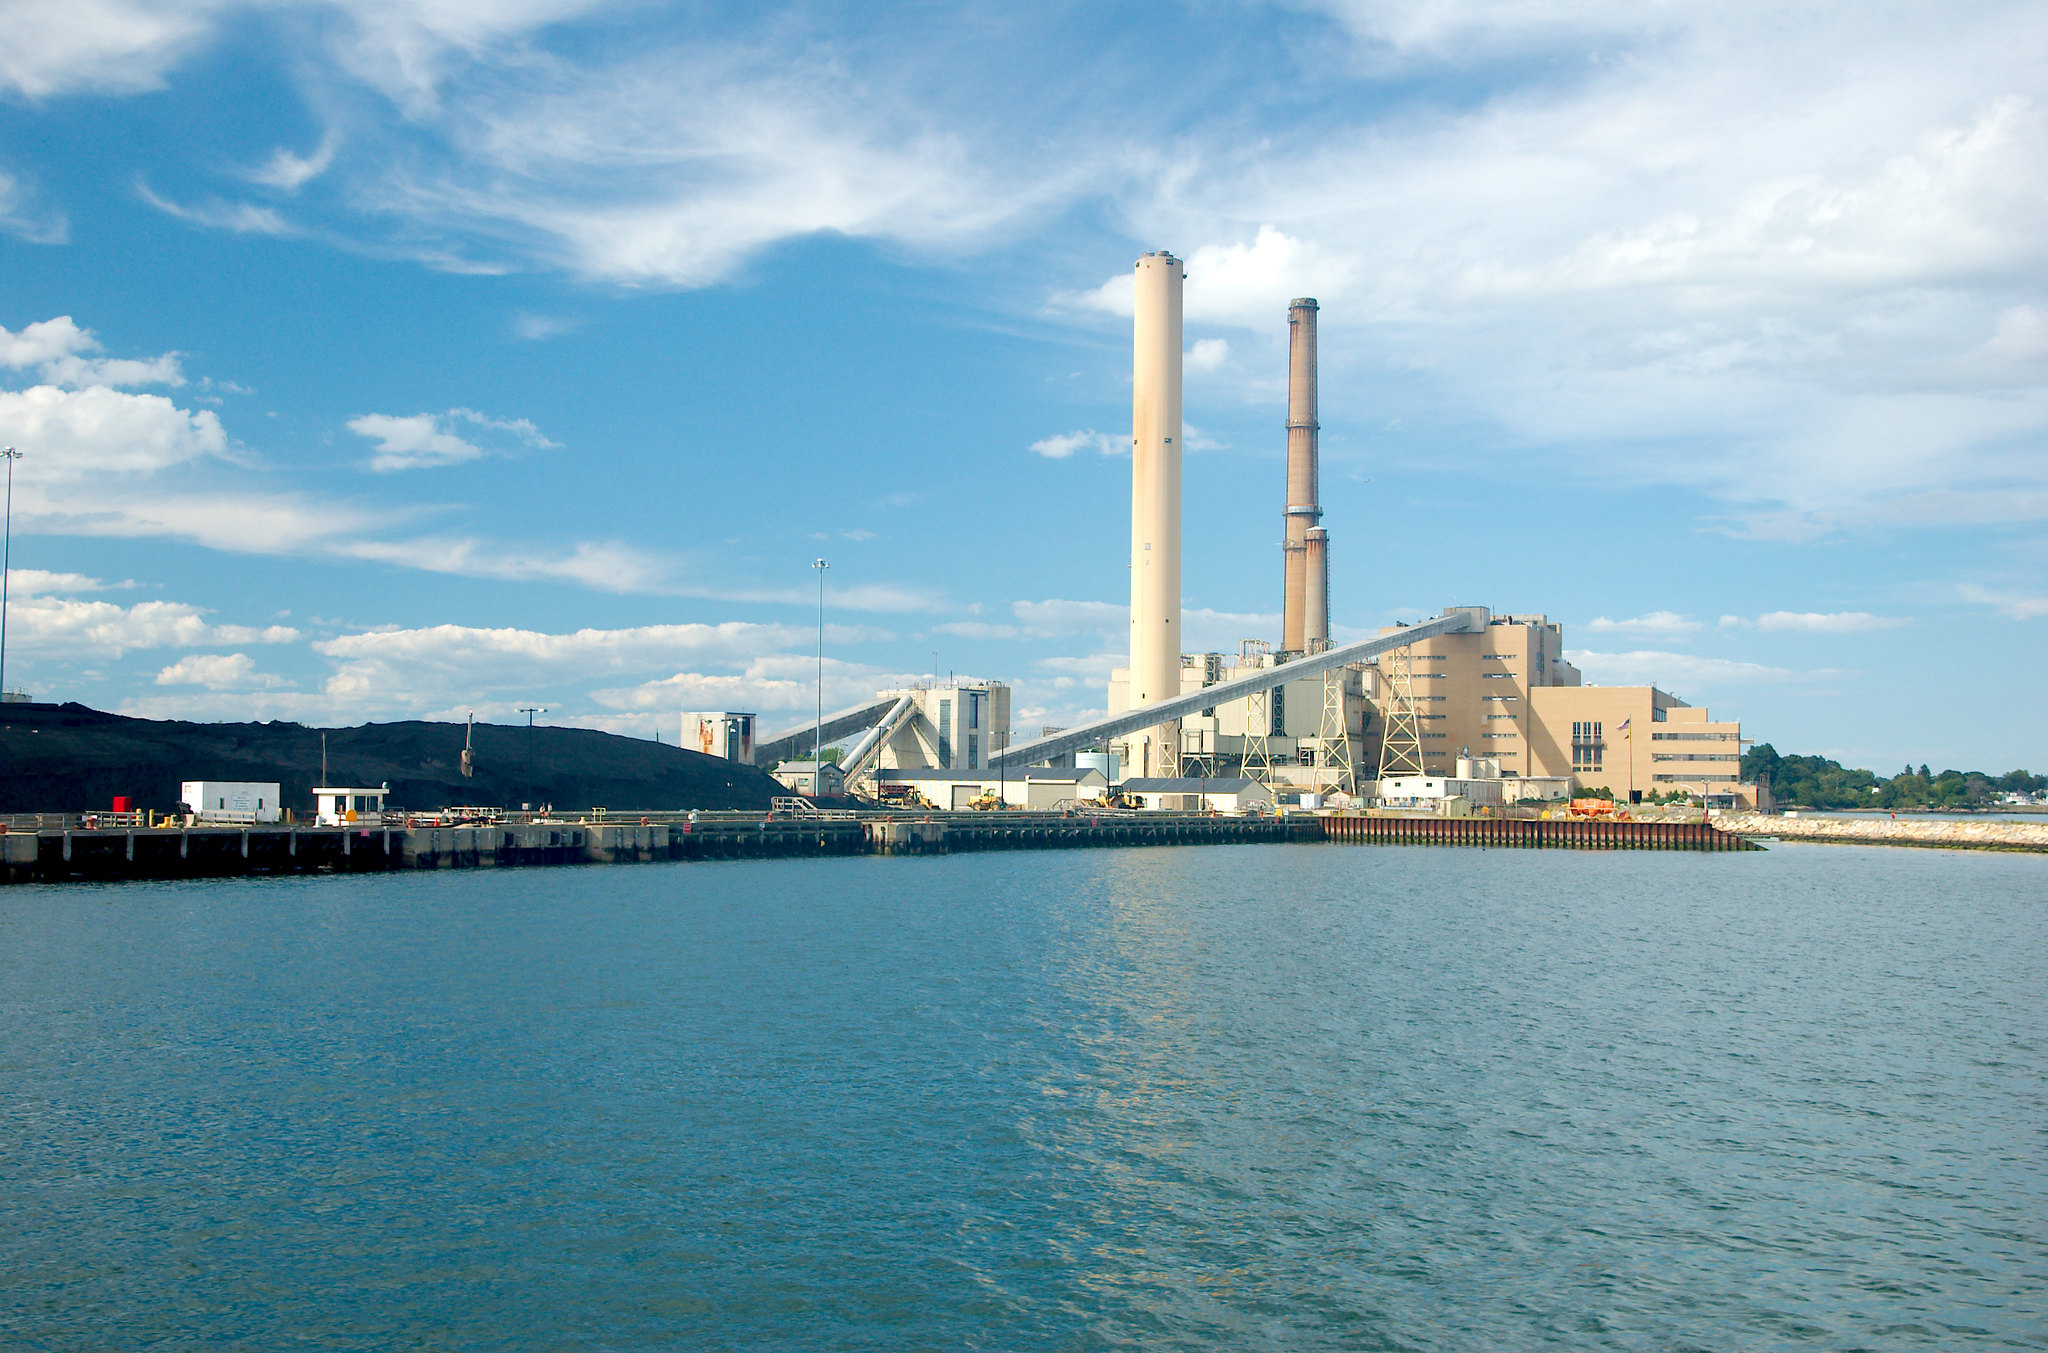 For Pacificorp, early coal shutdowns could create US$238m in savings. Credit: Flickr / massmatt